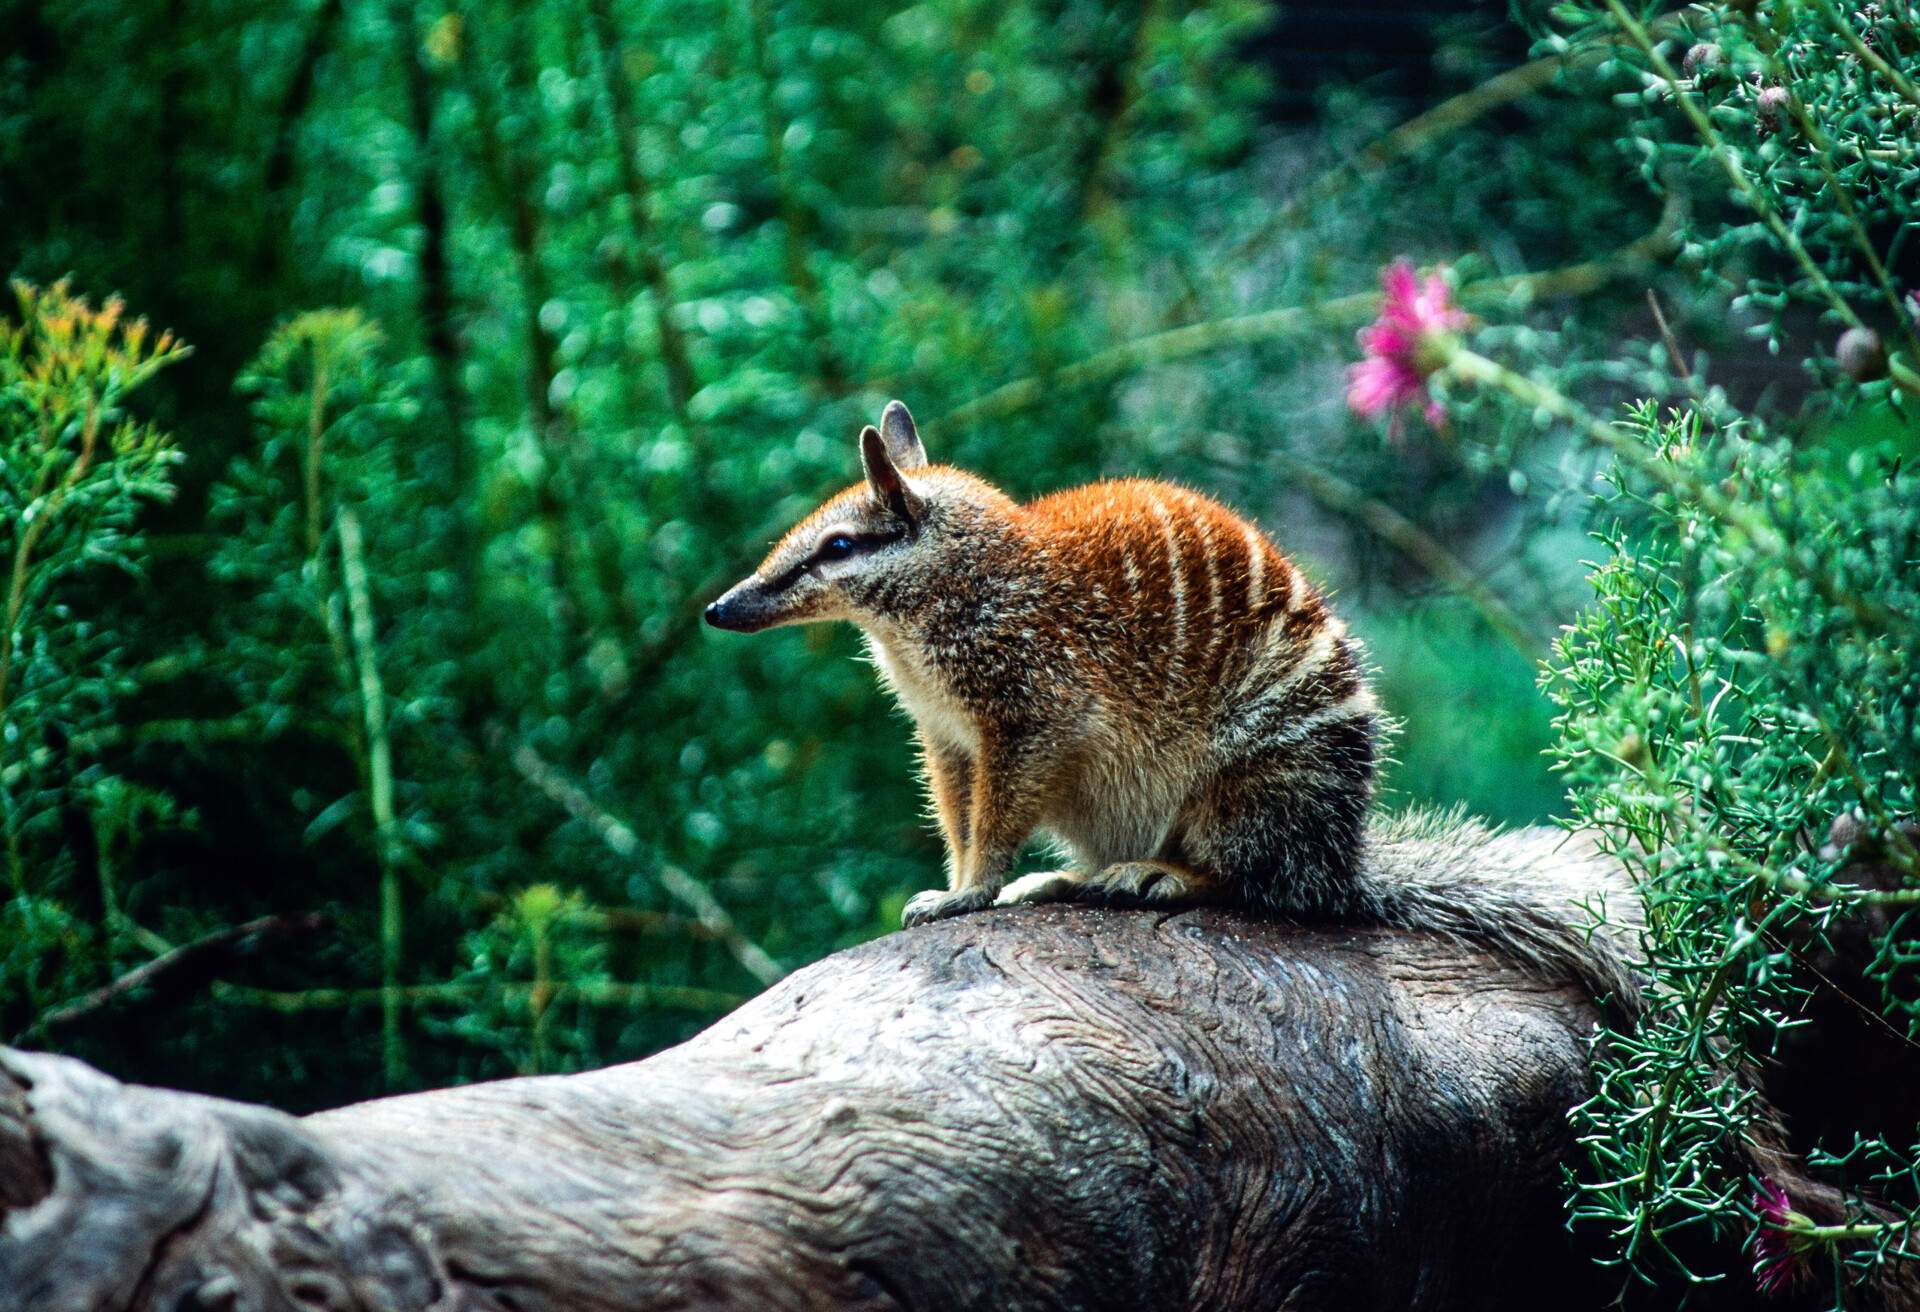 THEME_NATURE_NUMBAT_GettyImages-1054325534